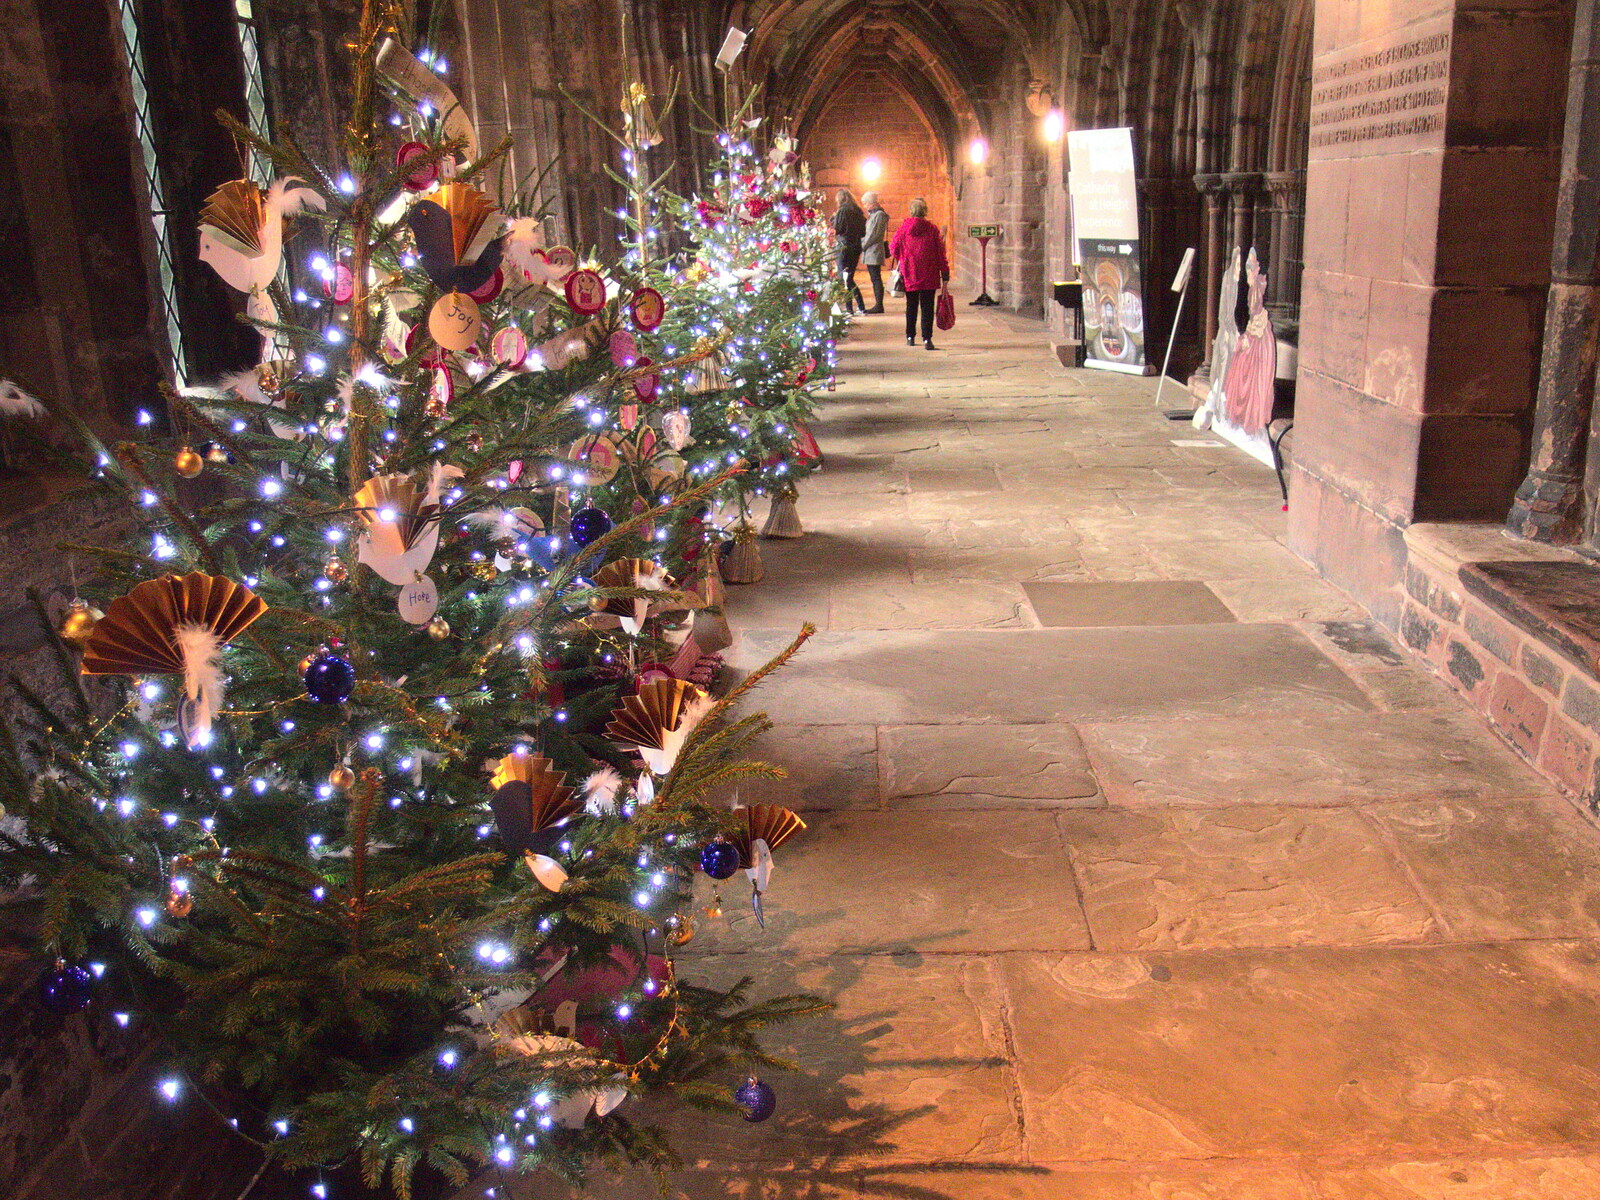 More Christmas trees in the cloisters from A Party and a Road Trip to Chester, Suffolk and Cheshire - 20th December 2015